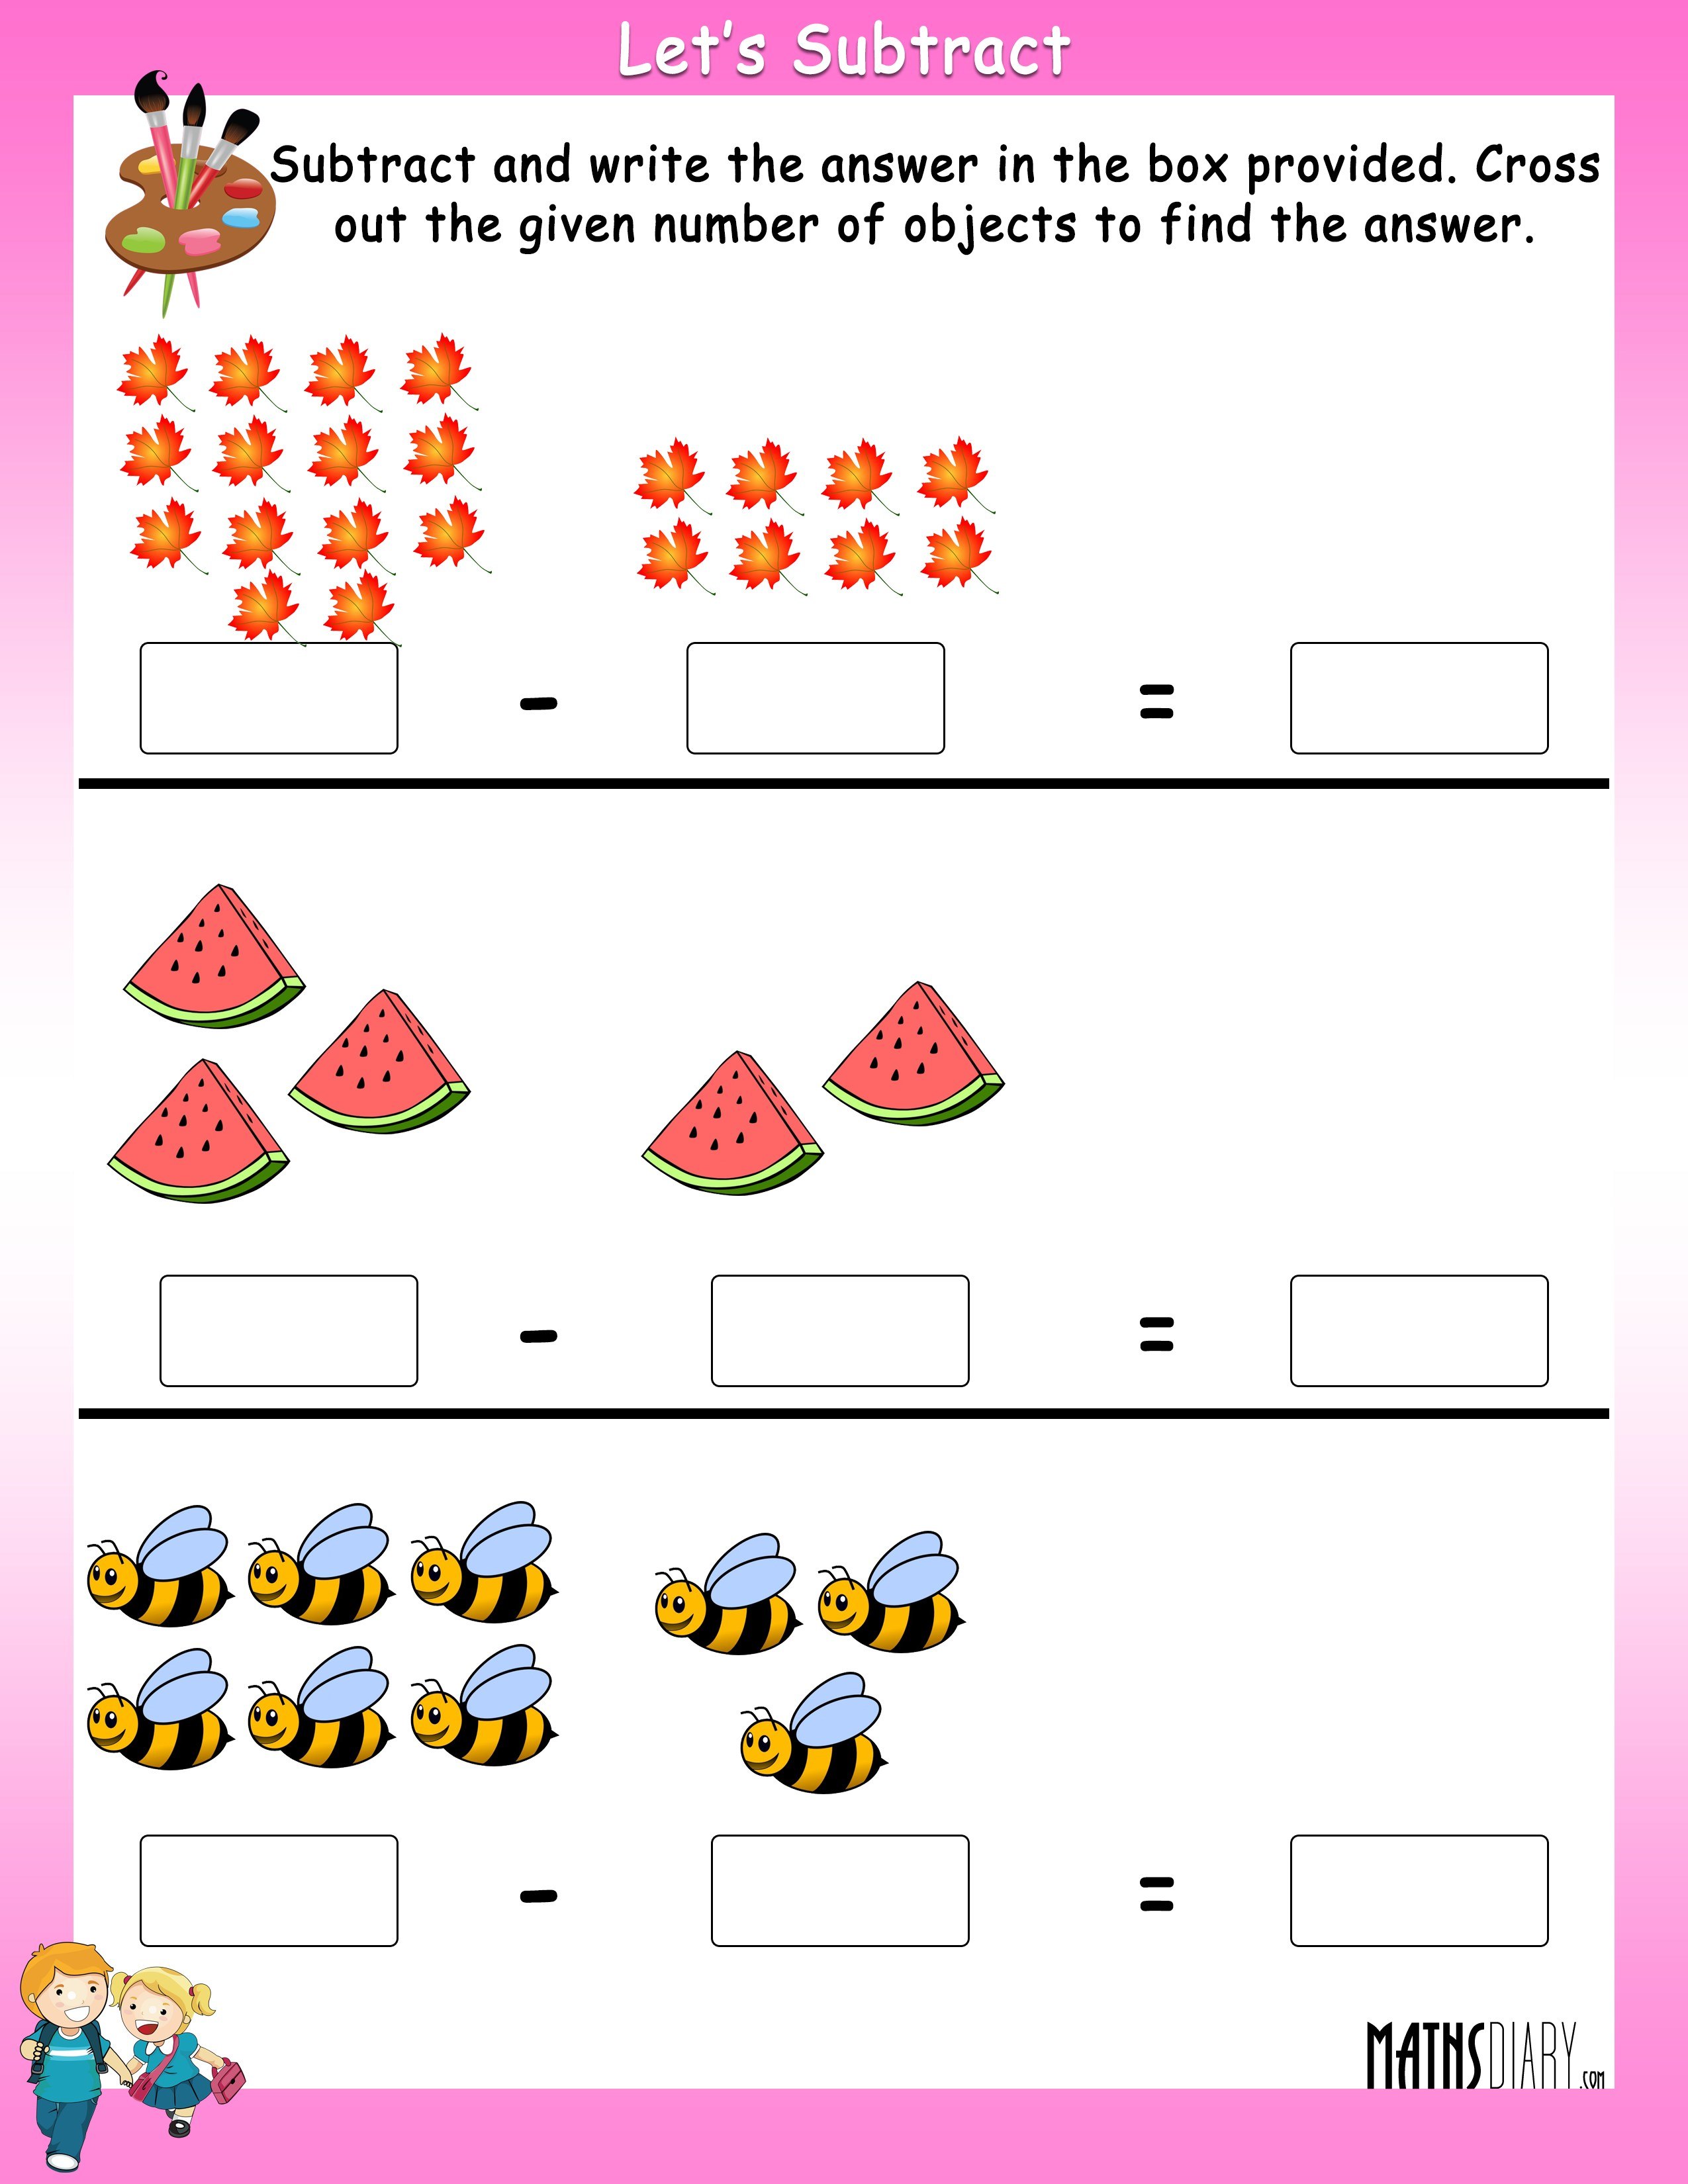 subtract-by-crossing-the-objects-worksheets-math-worksheets